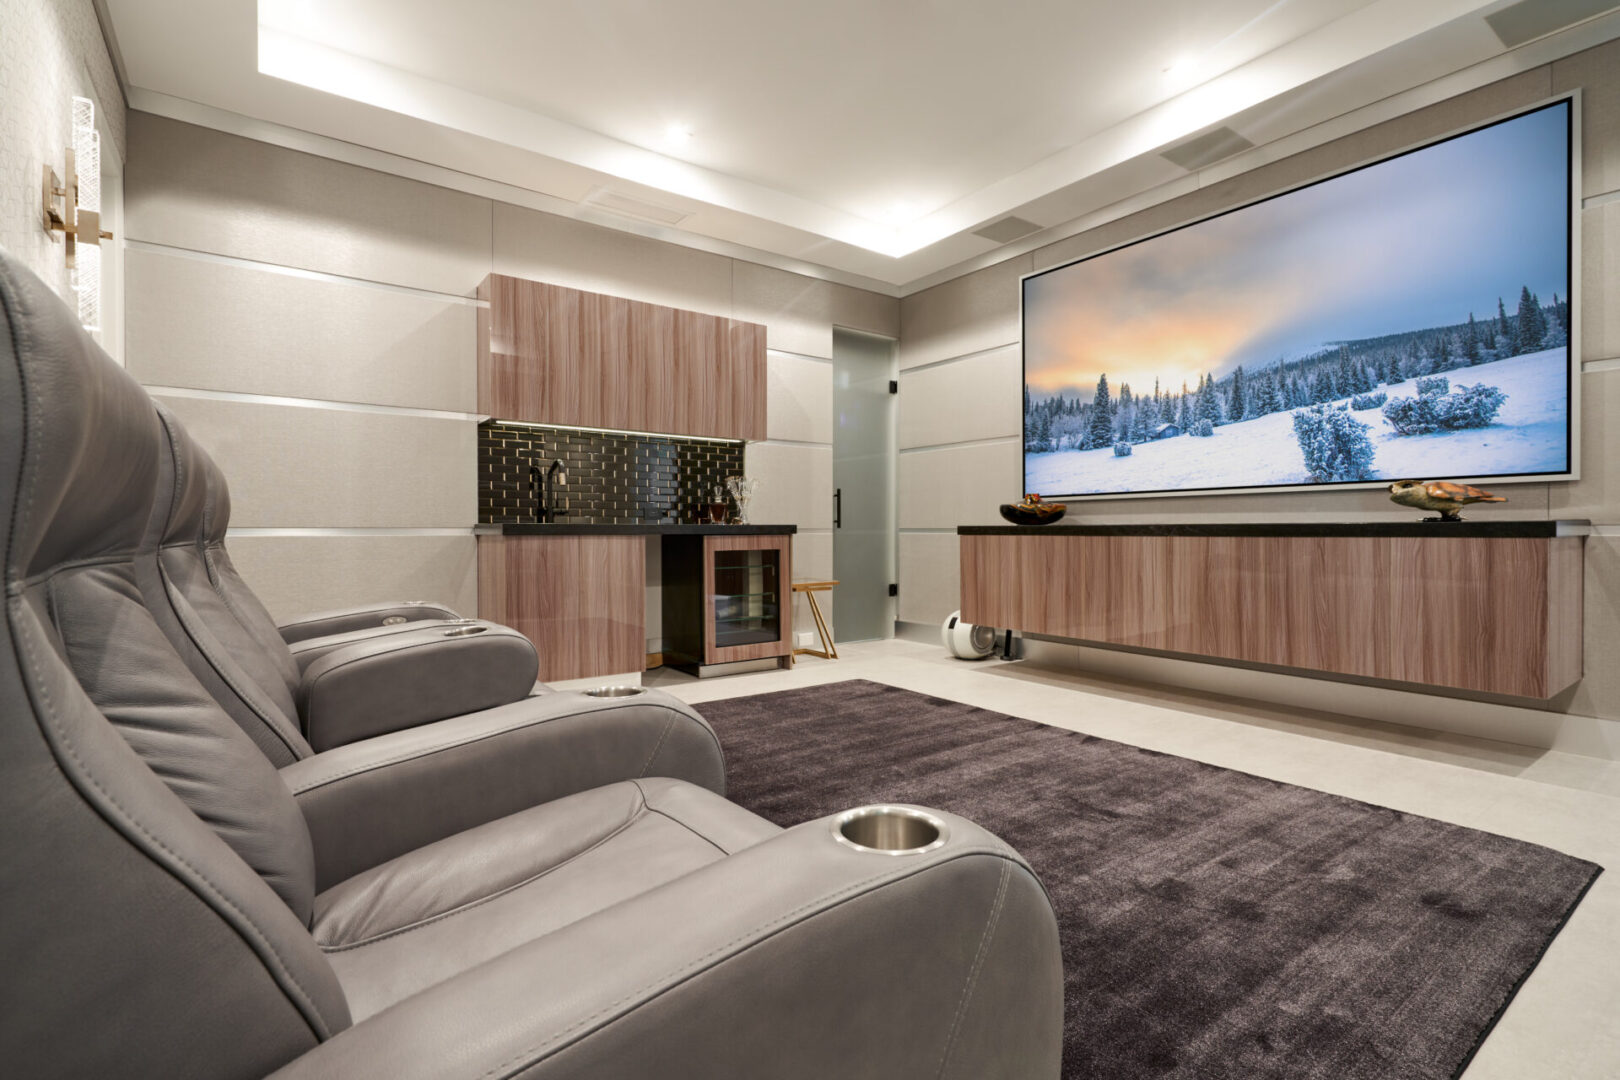 A media room with a huge TV